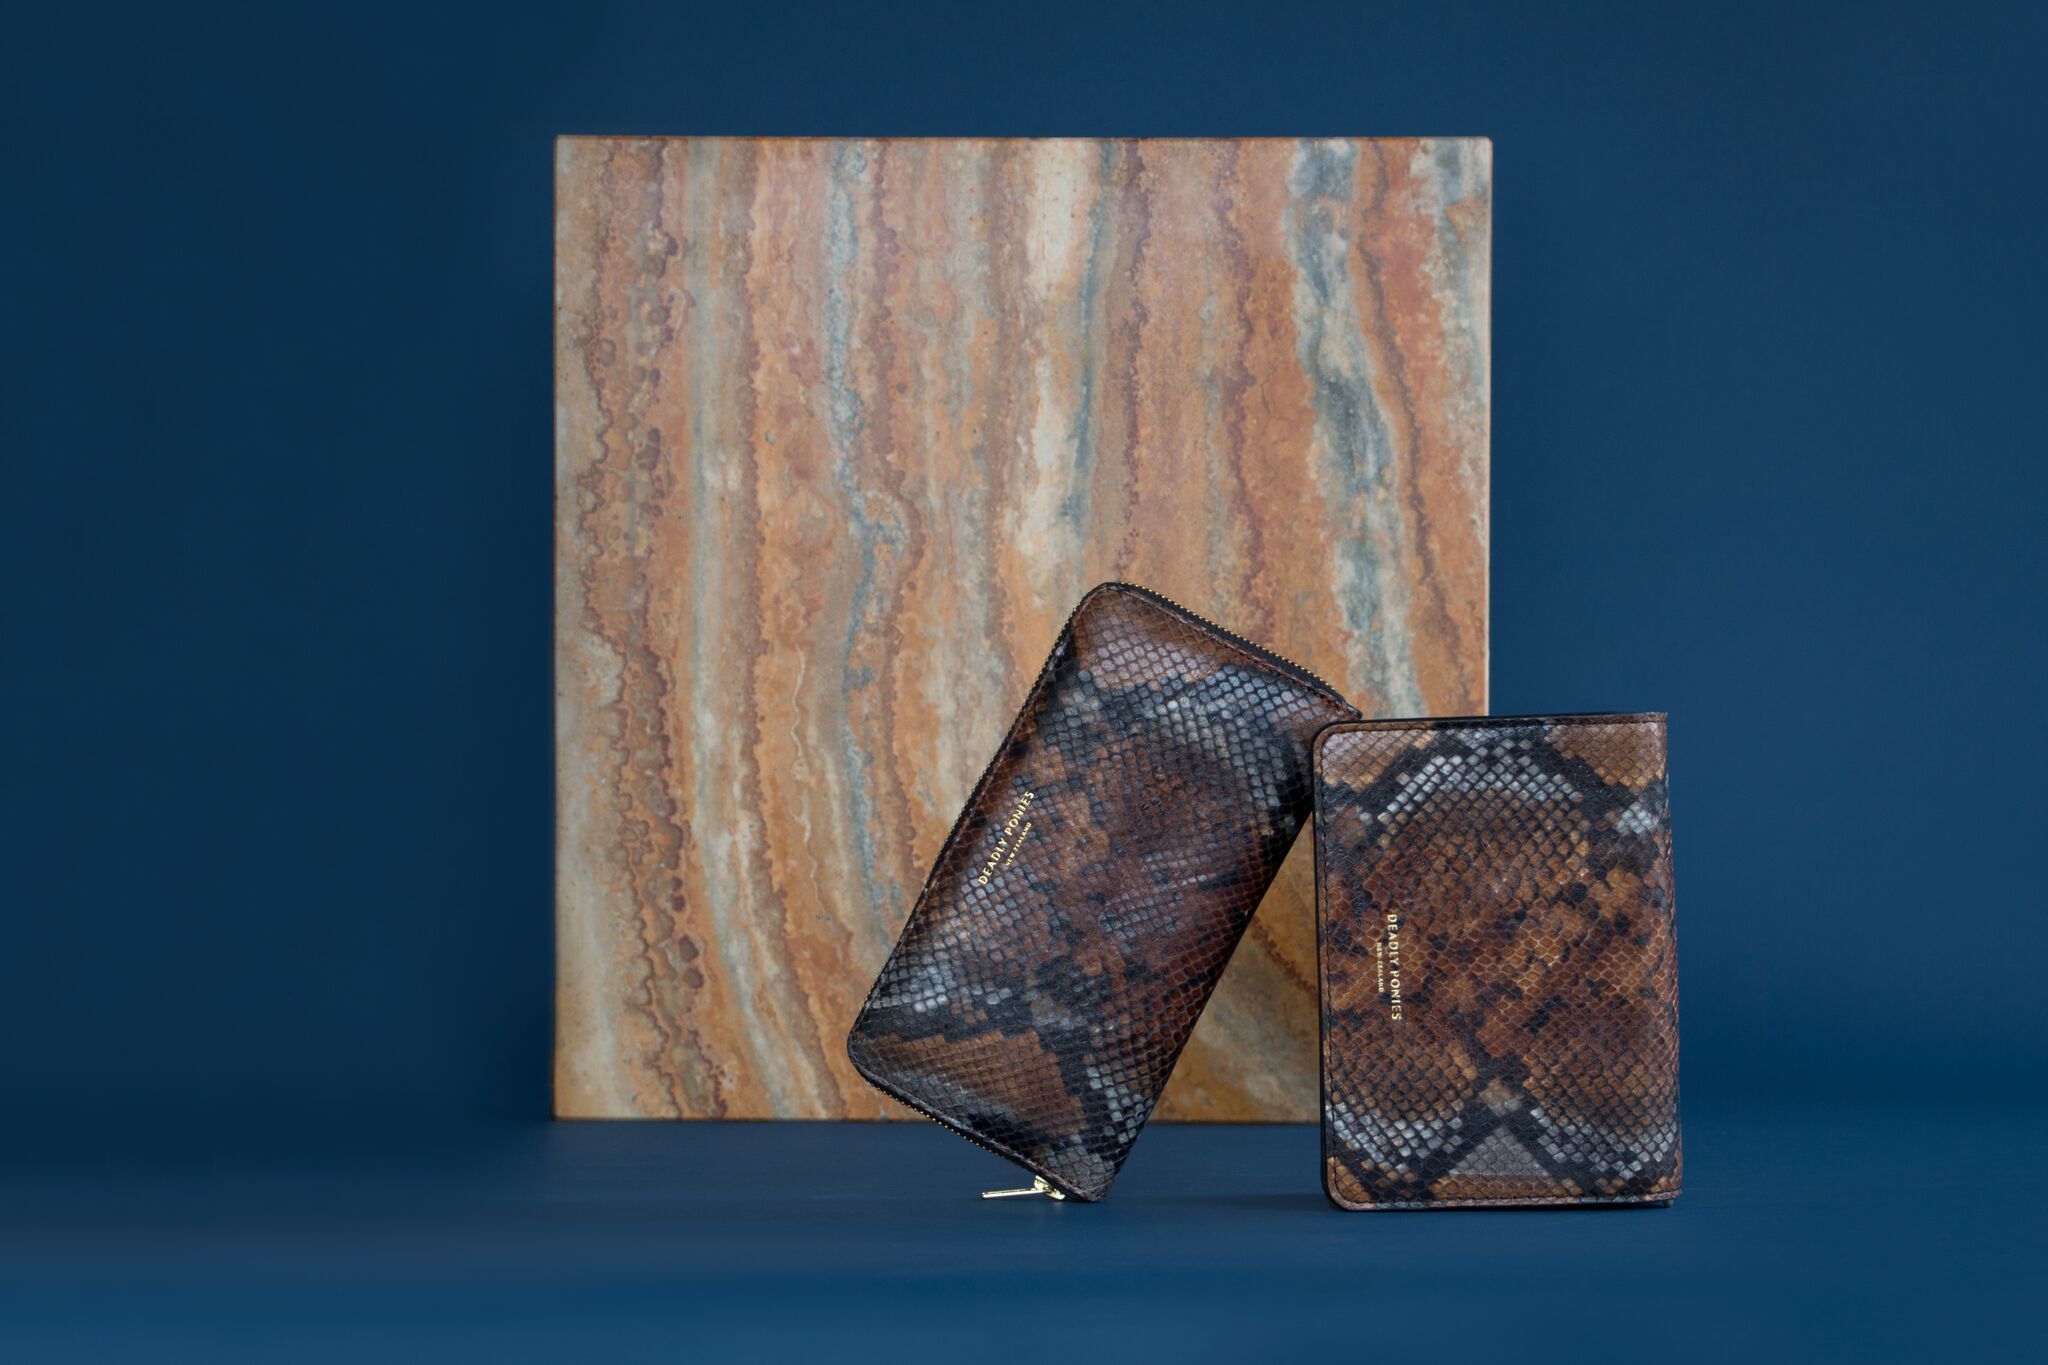 A couple of snake skin patterned wallets against a wooden block and blue background